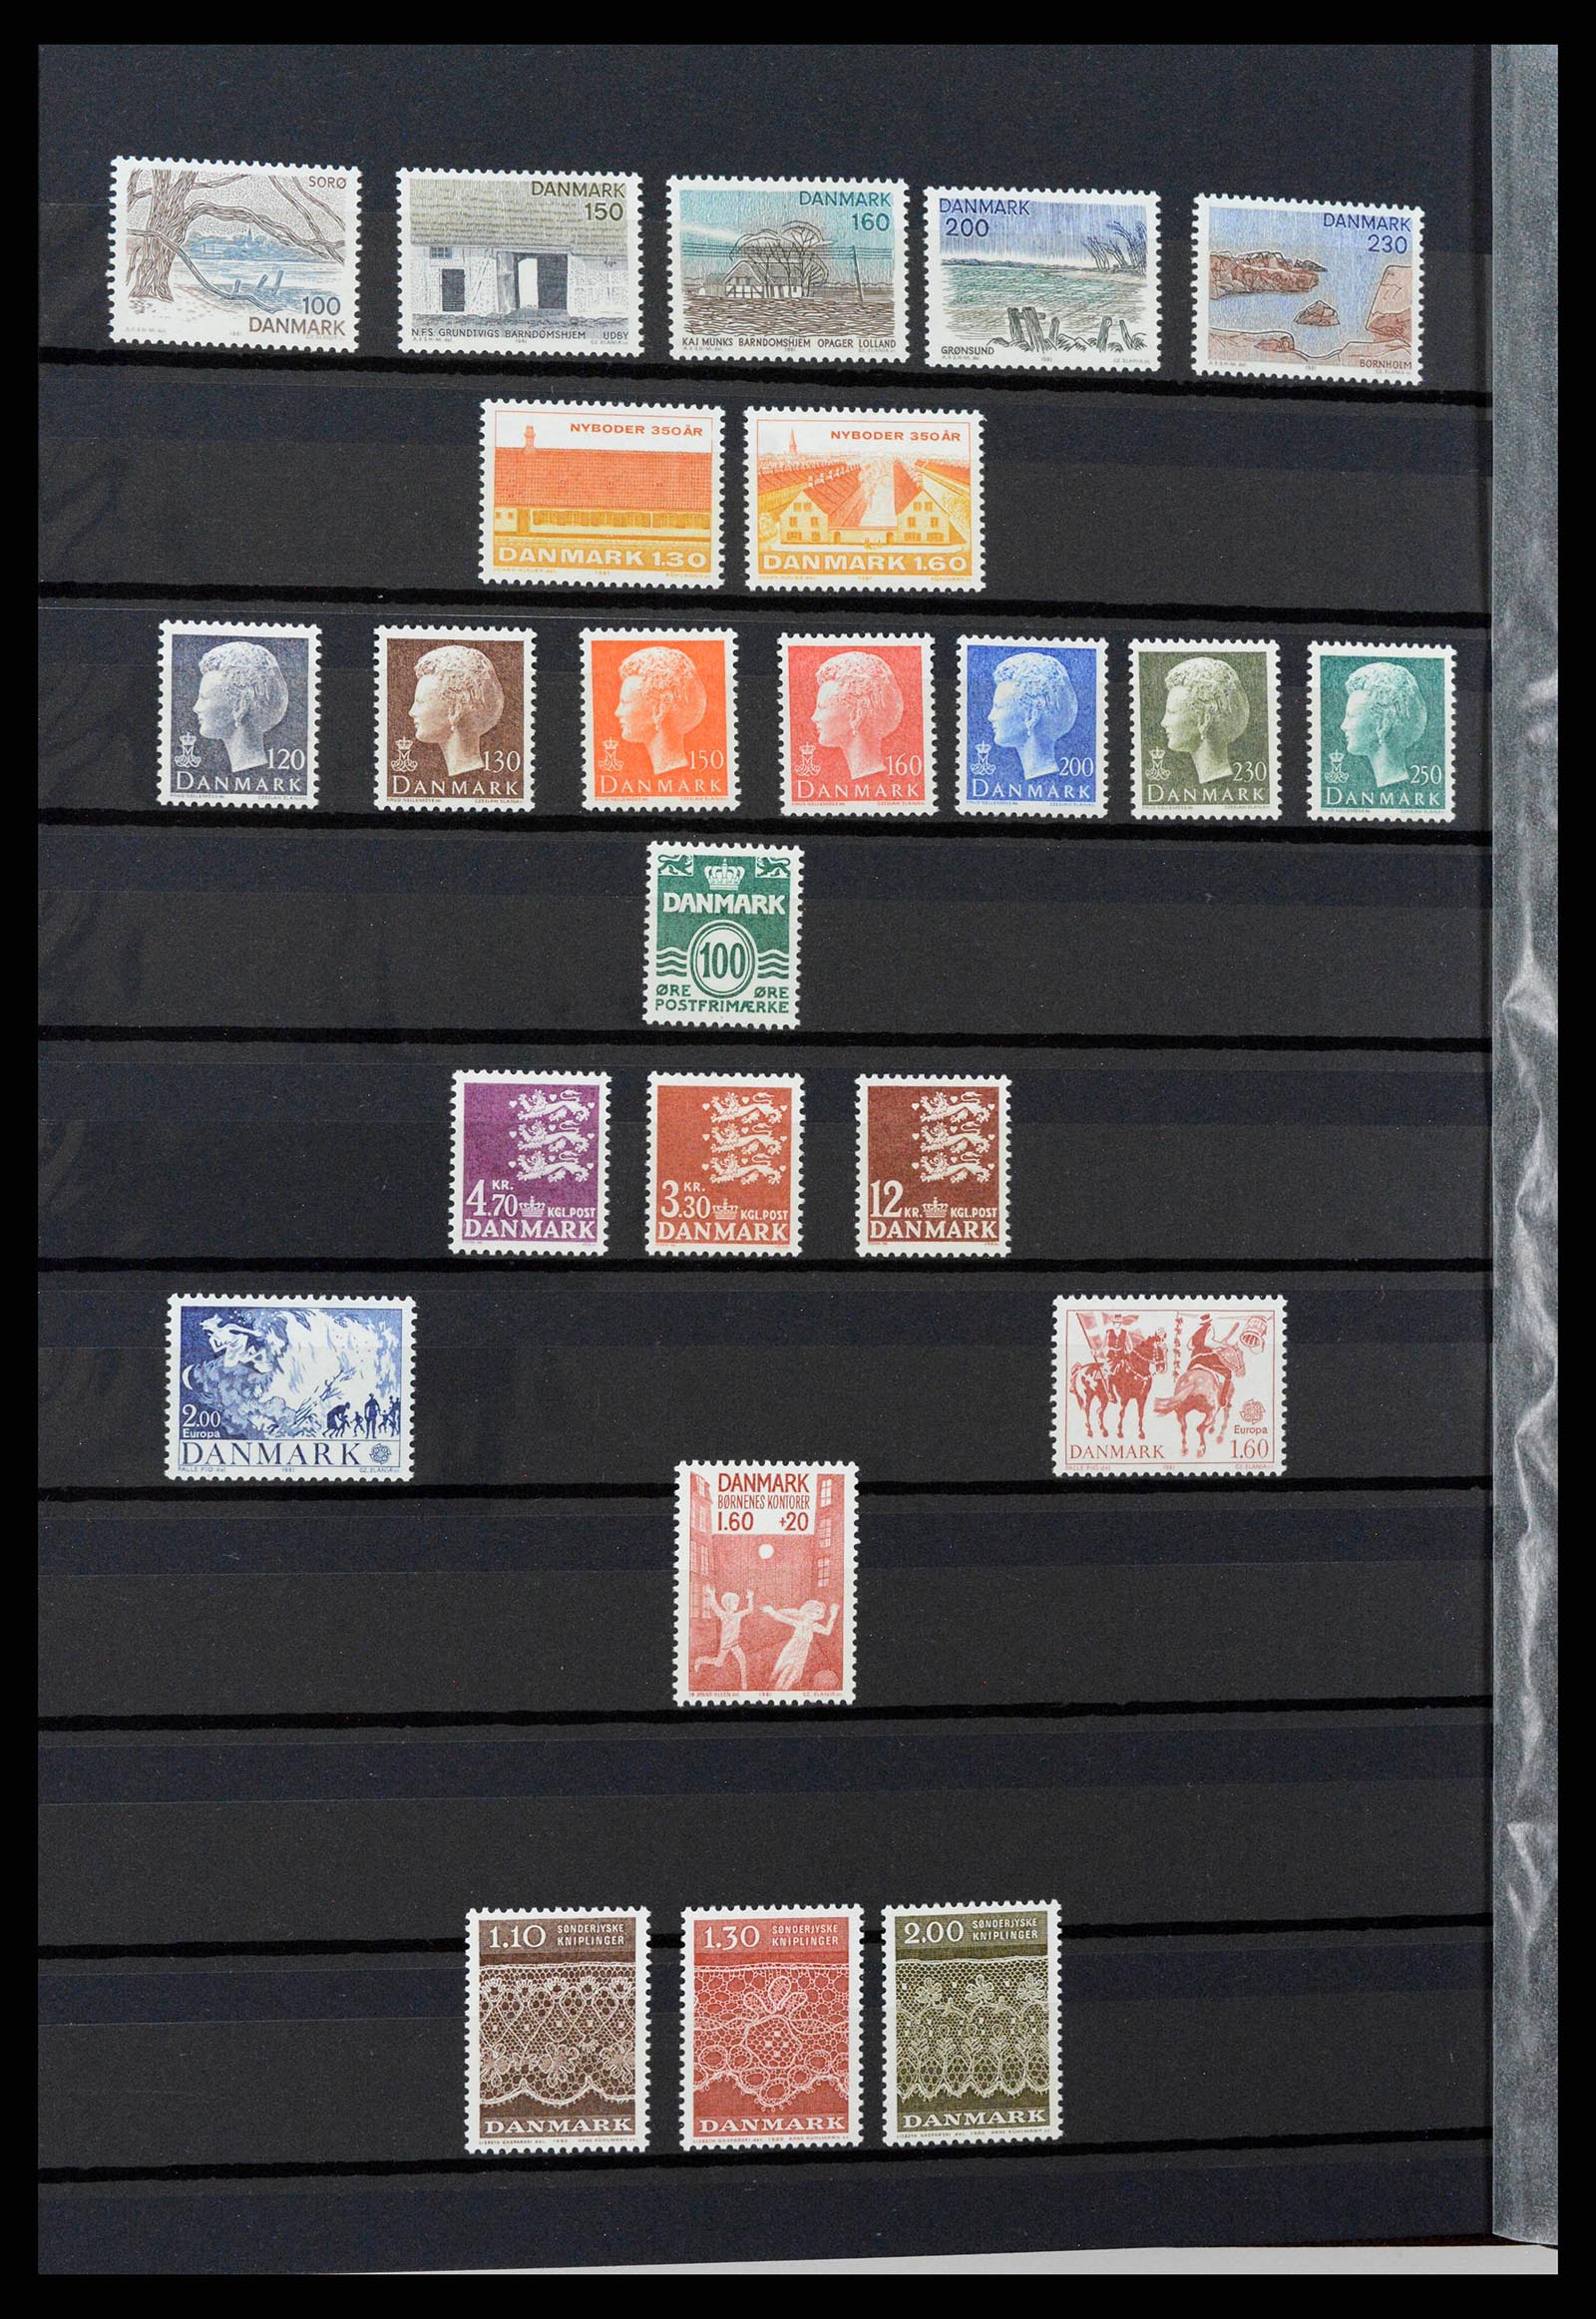 38858 0006 - Stamp collection 38858 Denmark 1976-2014.